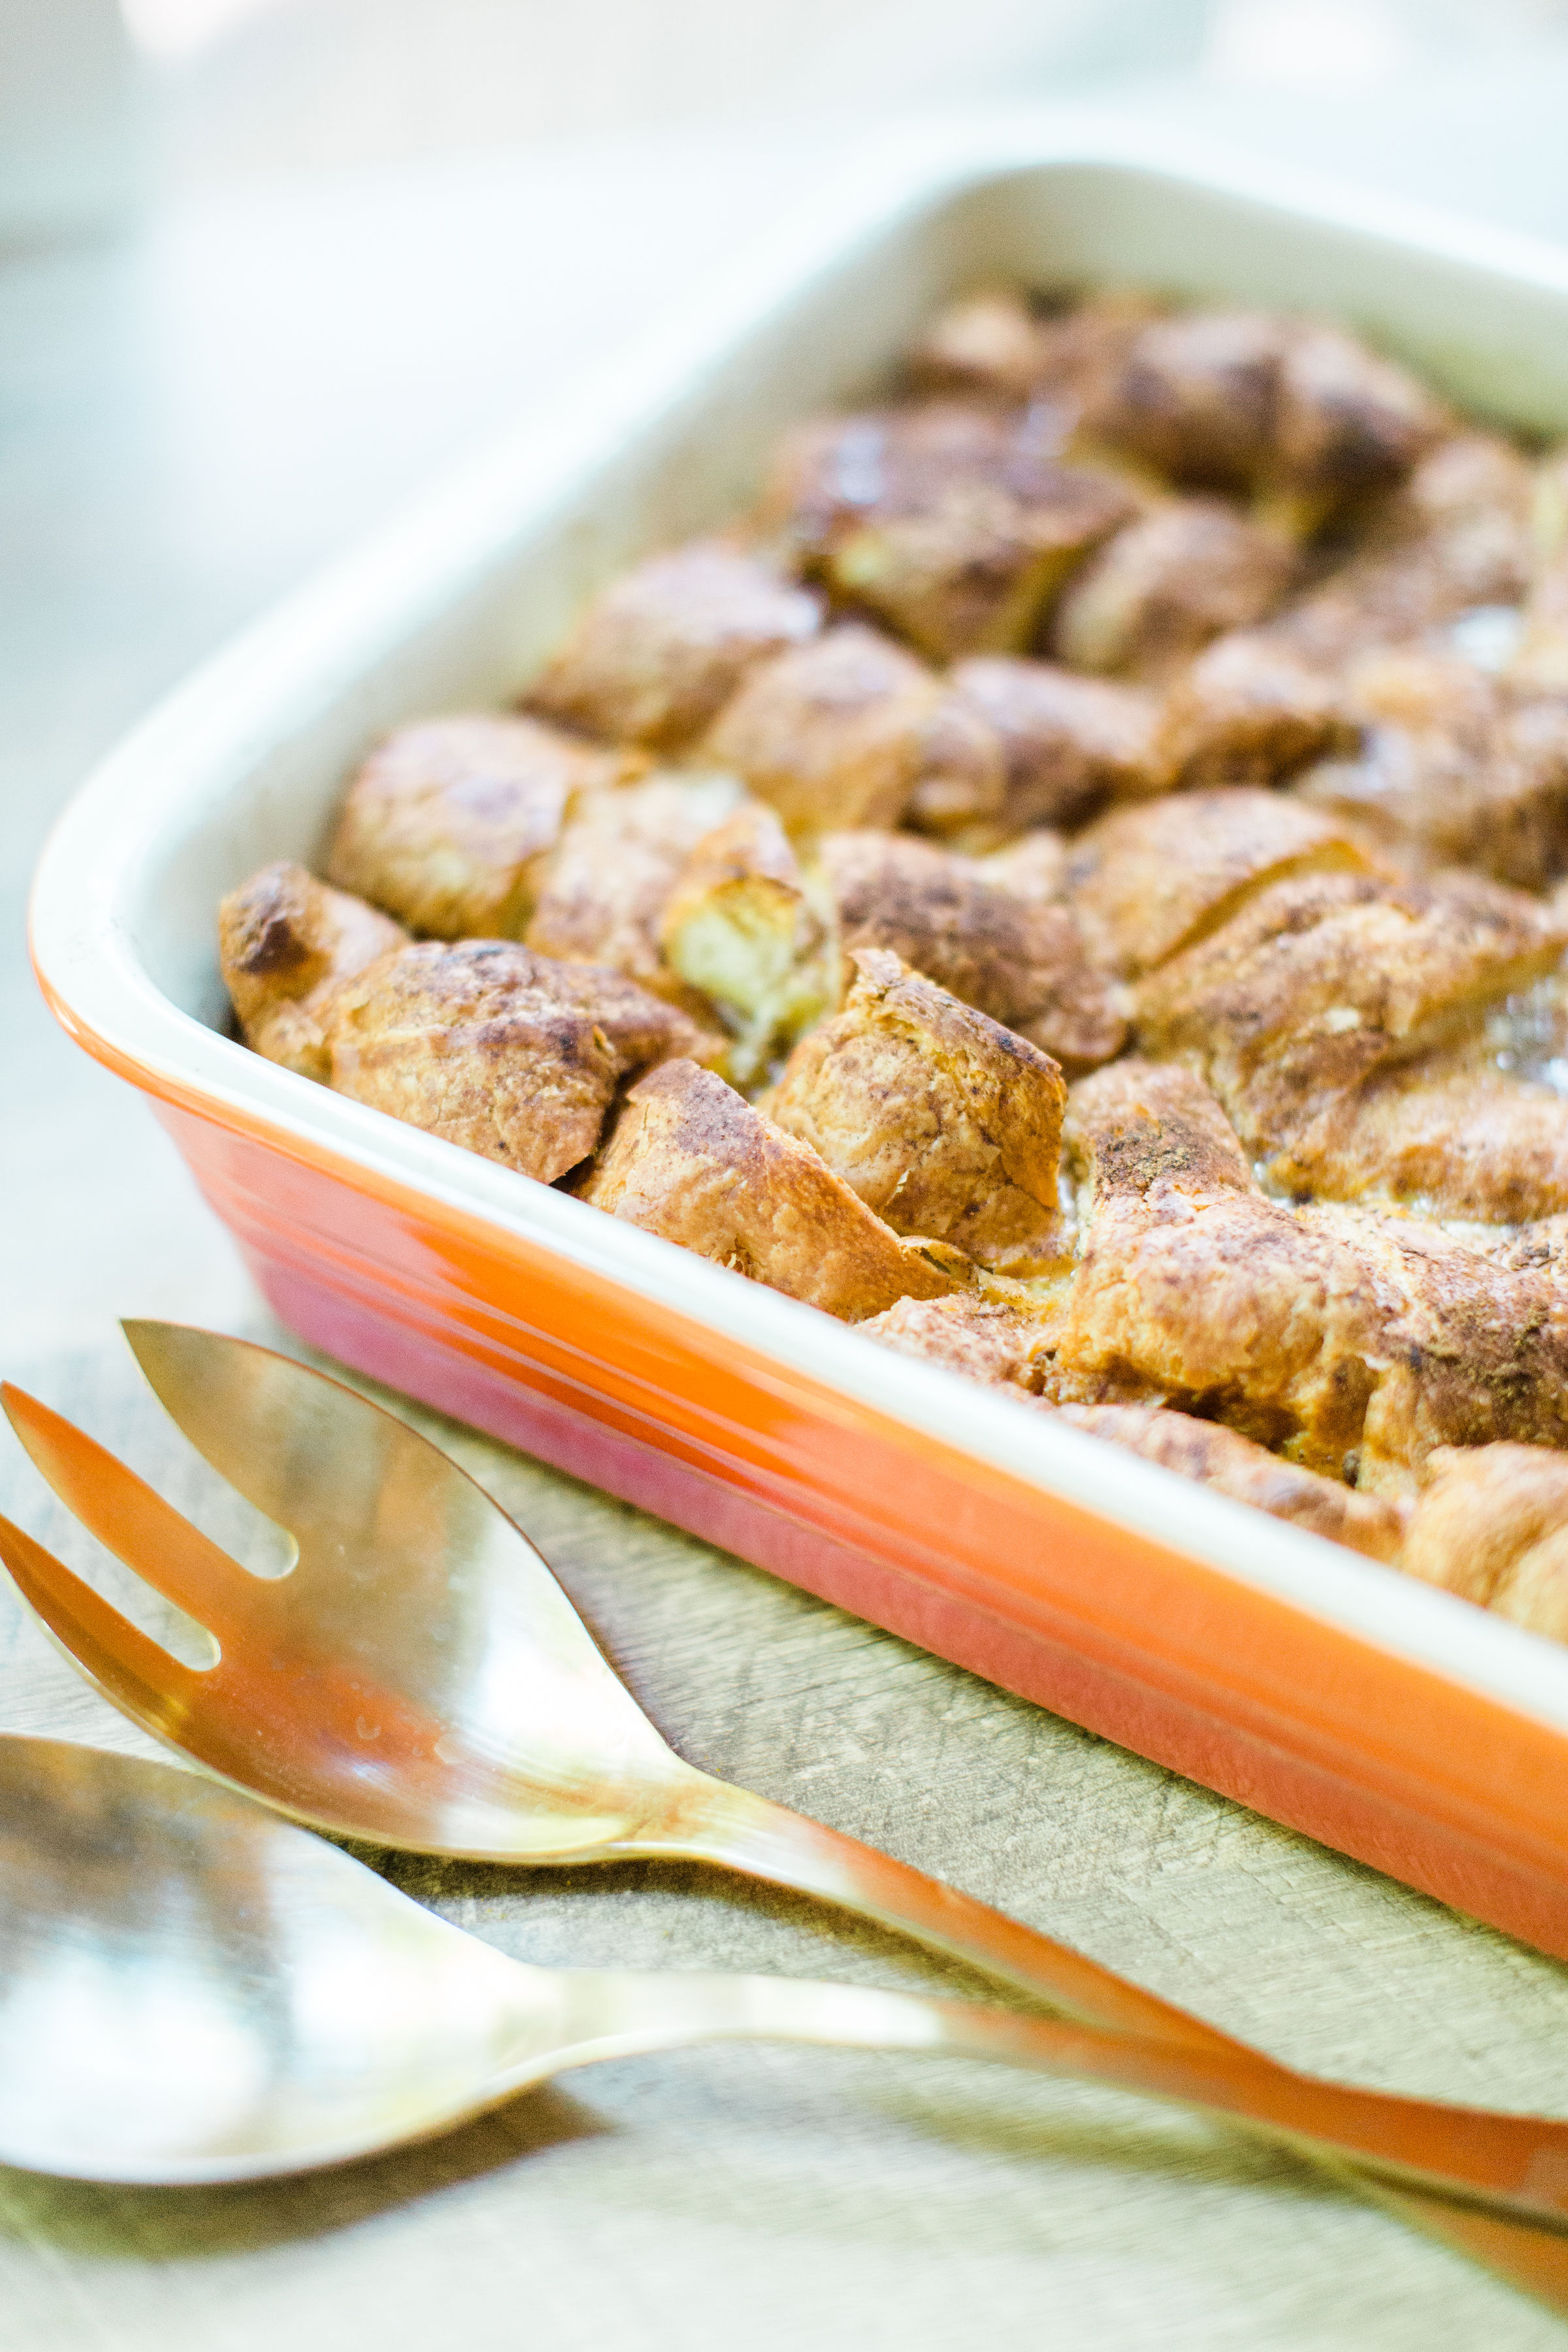 Look no further than this insanely amazing overnight crème brûlée french toast casserole. This decadent dessert has been a staple at our family brunches for years, and with this one special tweak, we've managed to make it even better. Read on for the details! Click through for the recipe. #cremebruleefrenchtoast #cremebruleefrenchtoastcasserole #brunch | glitterinc.com | @glitterinc